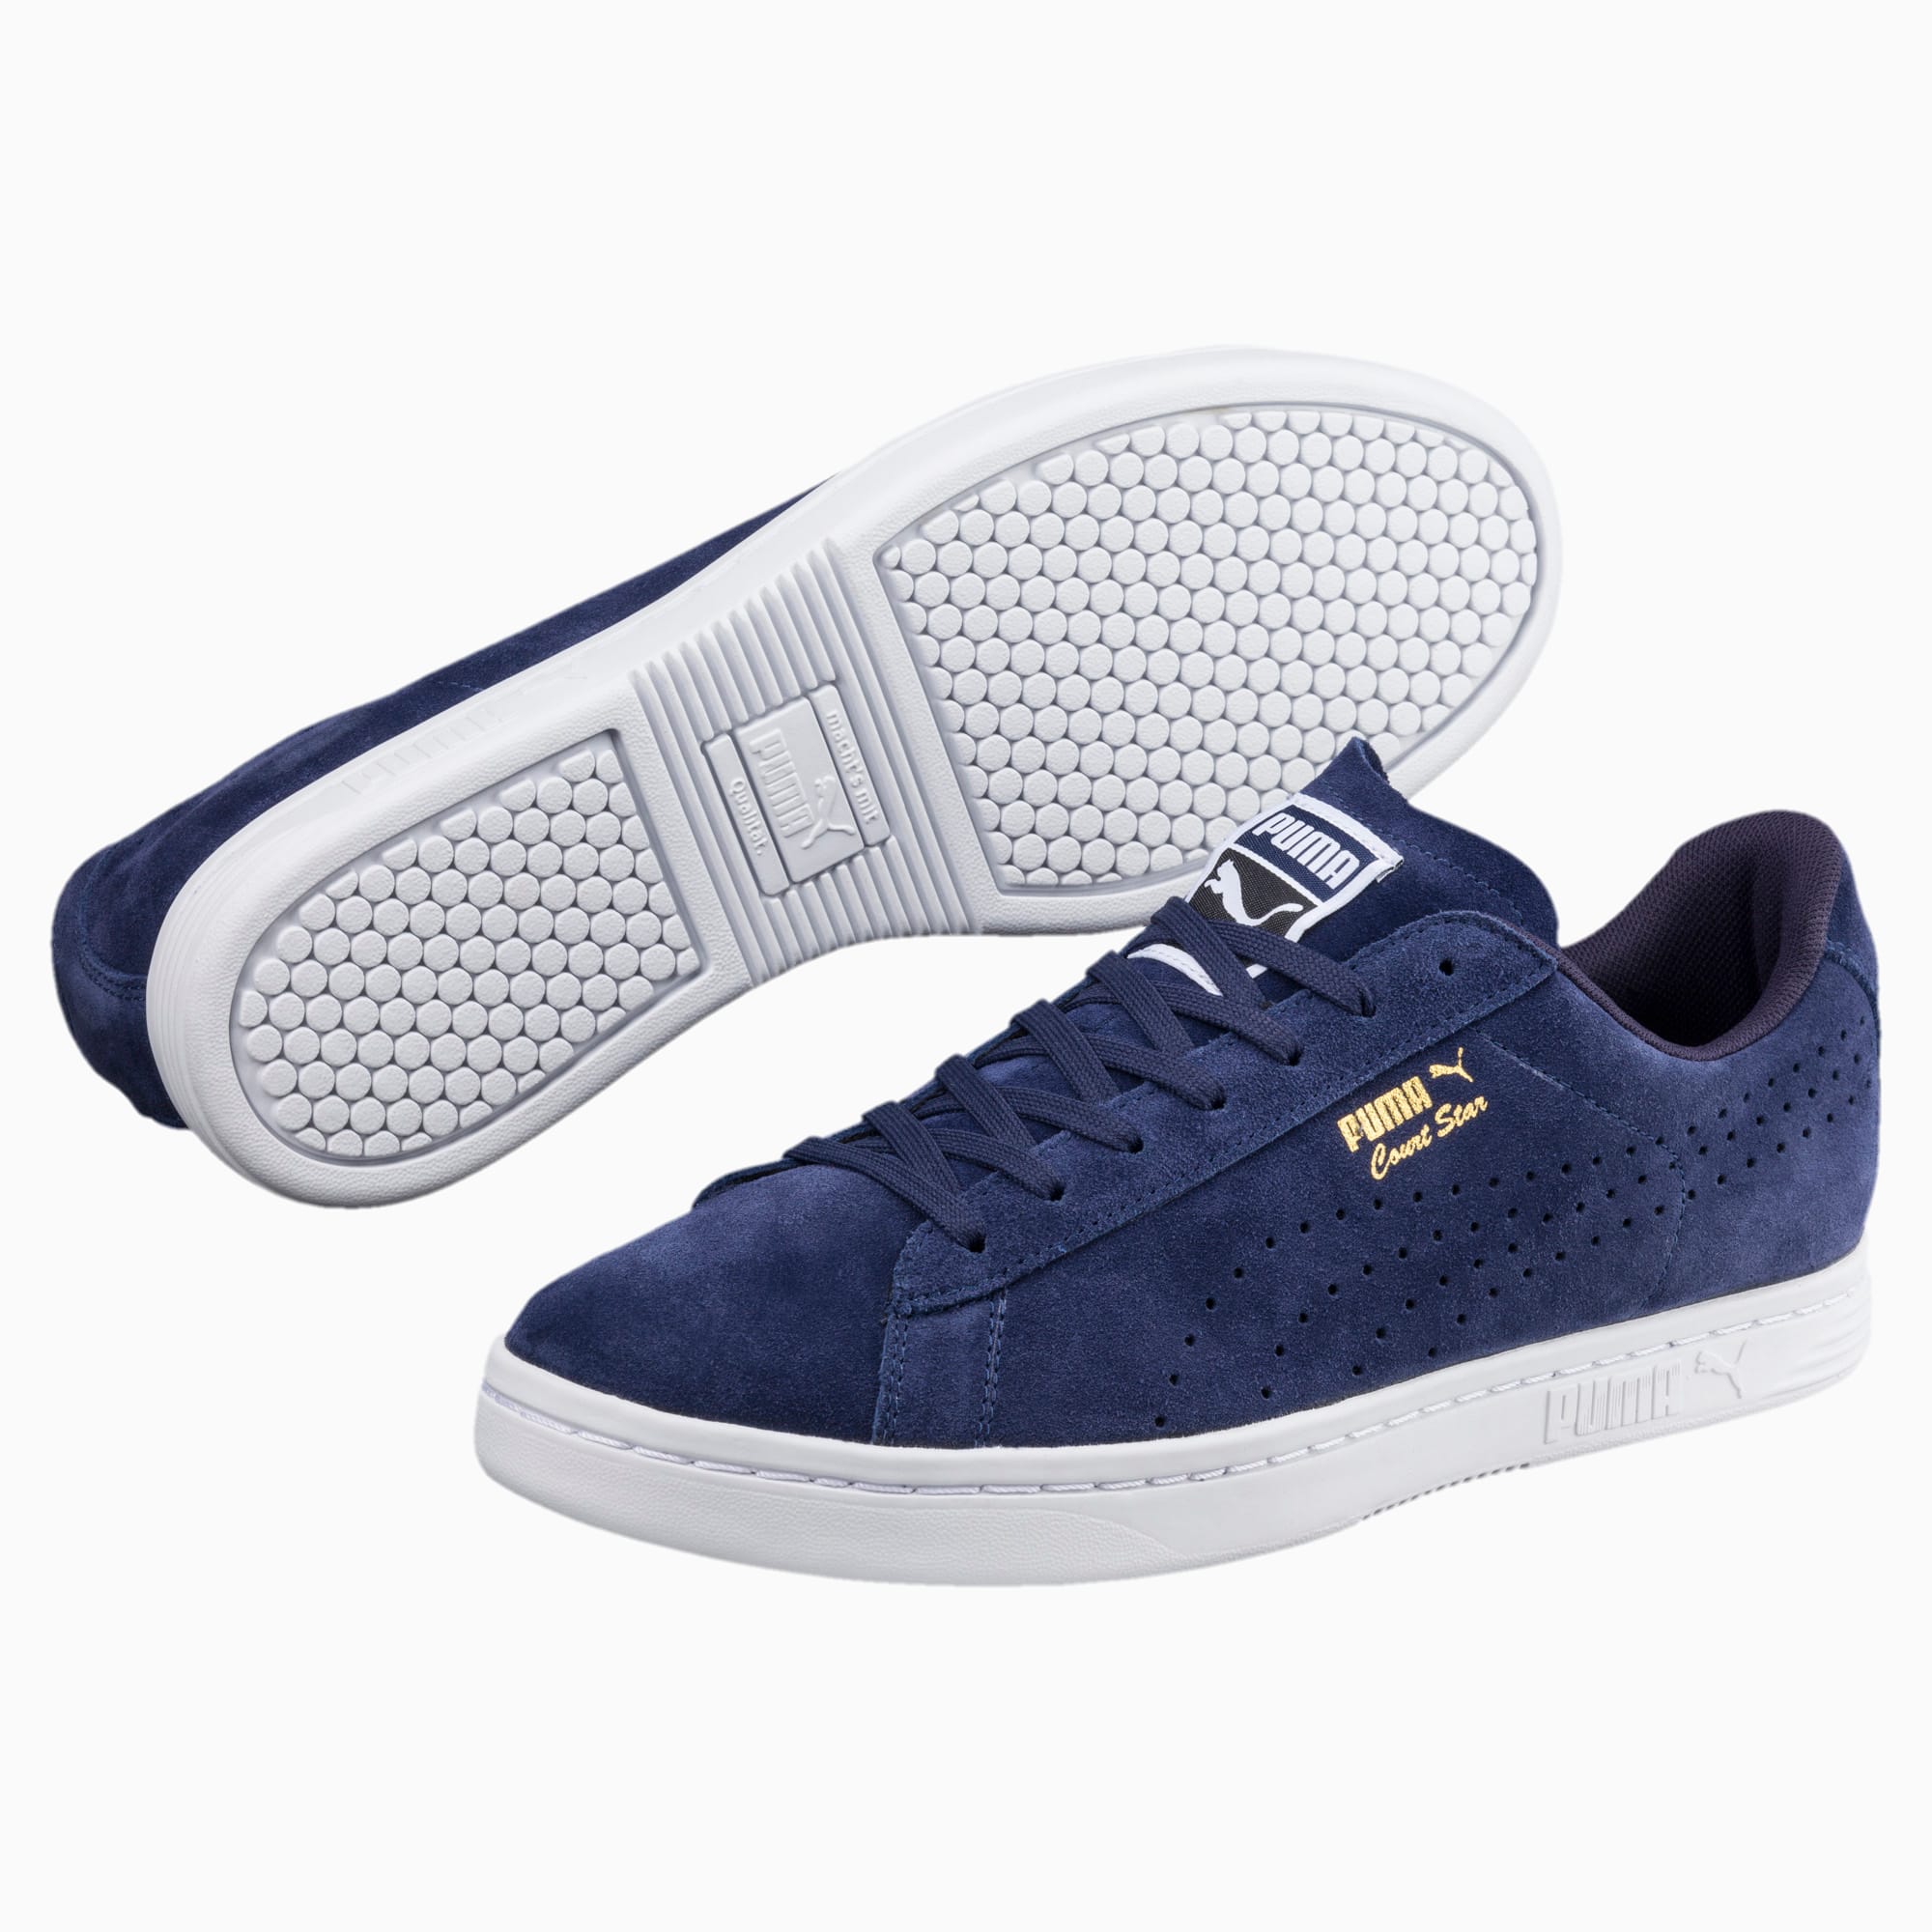 Court Star Suede Trainers | PUMA 